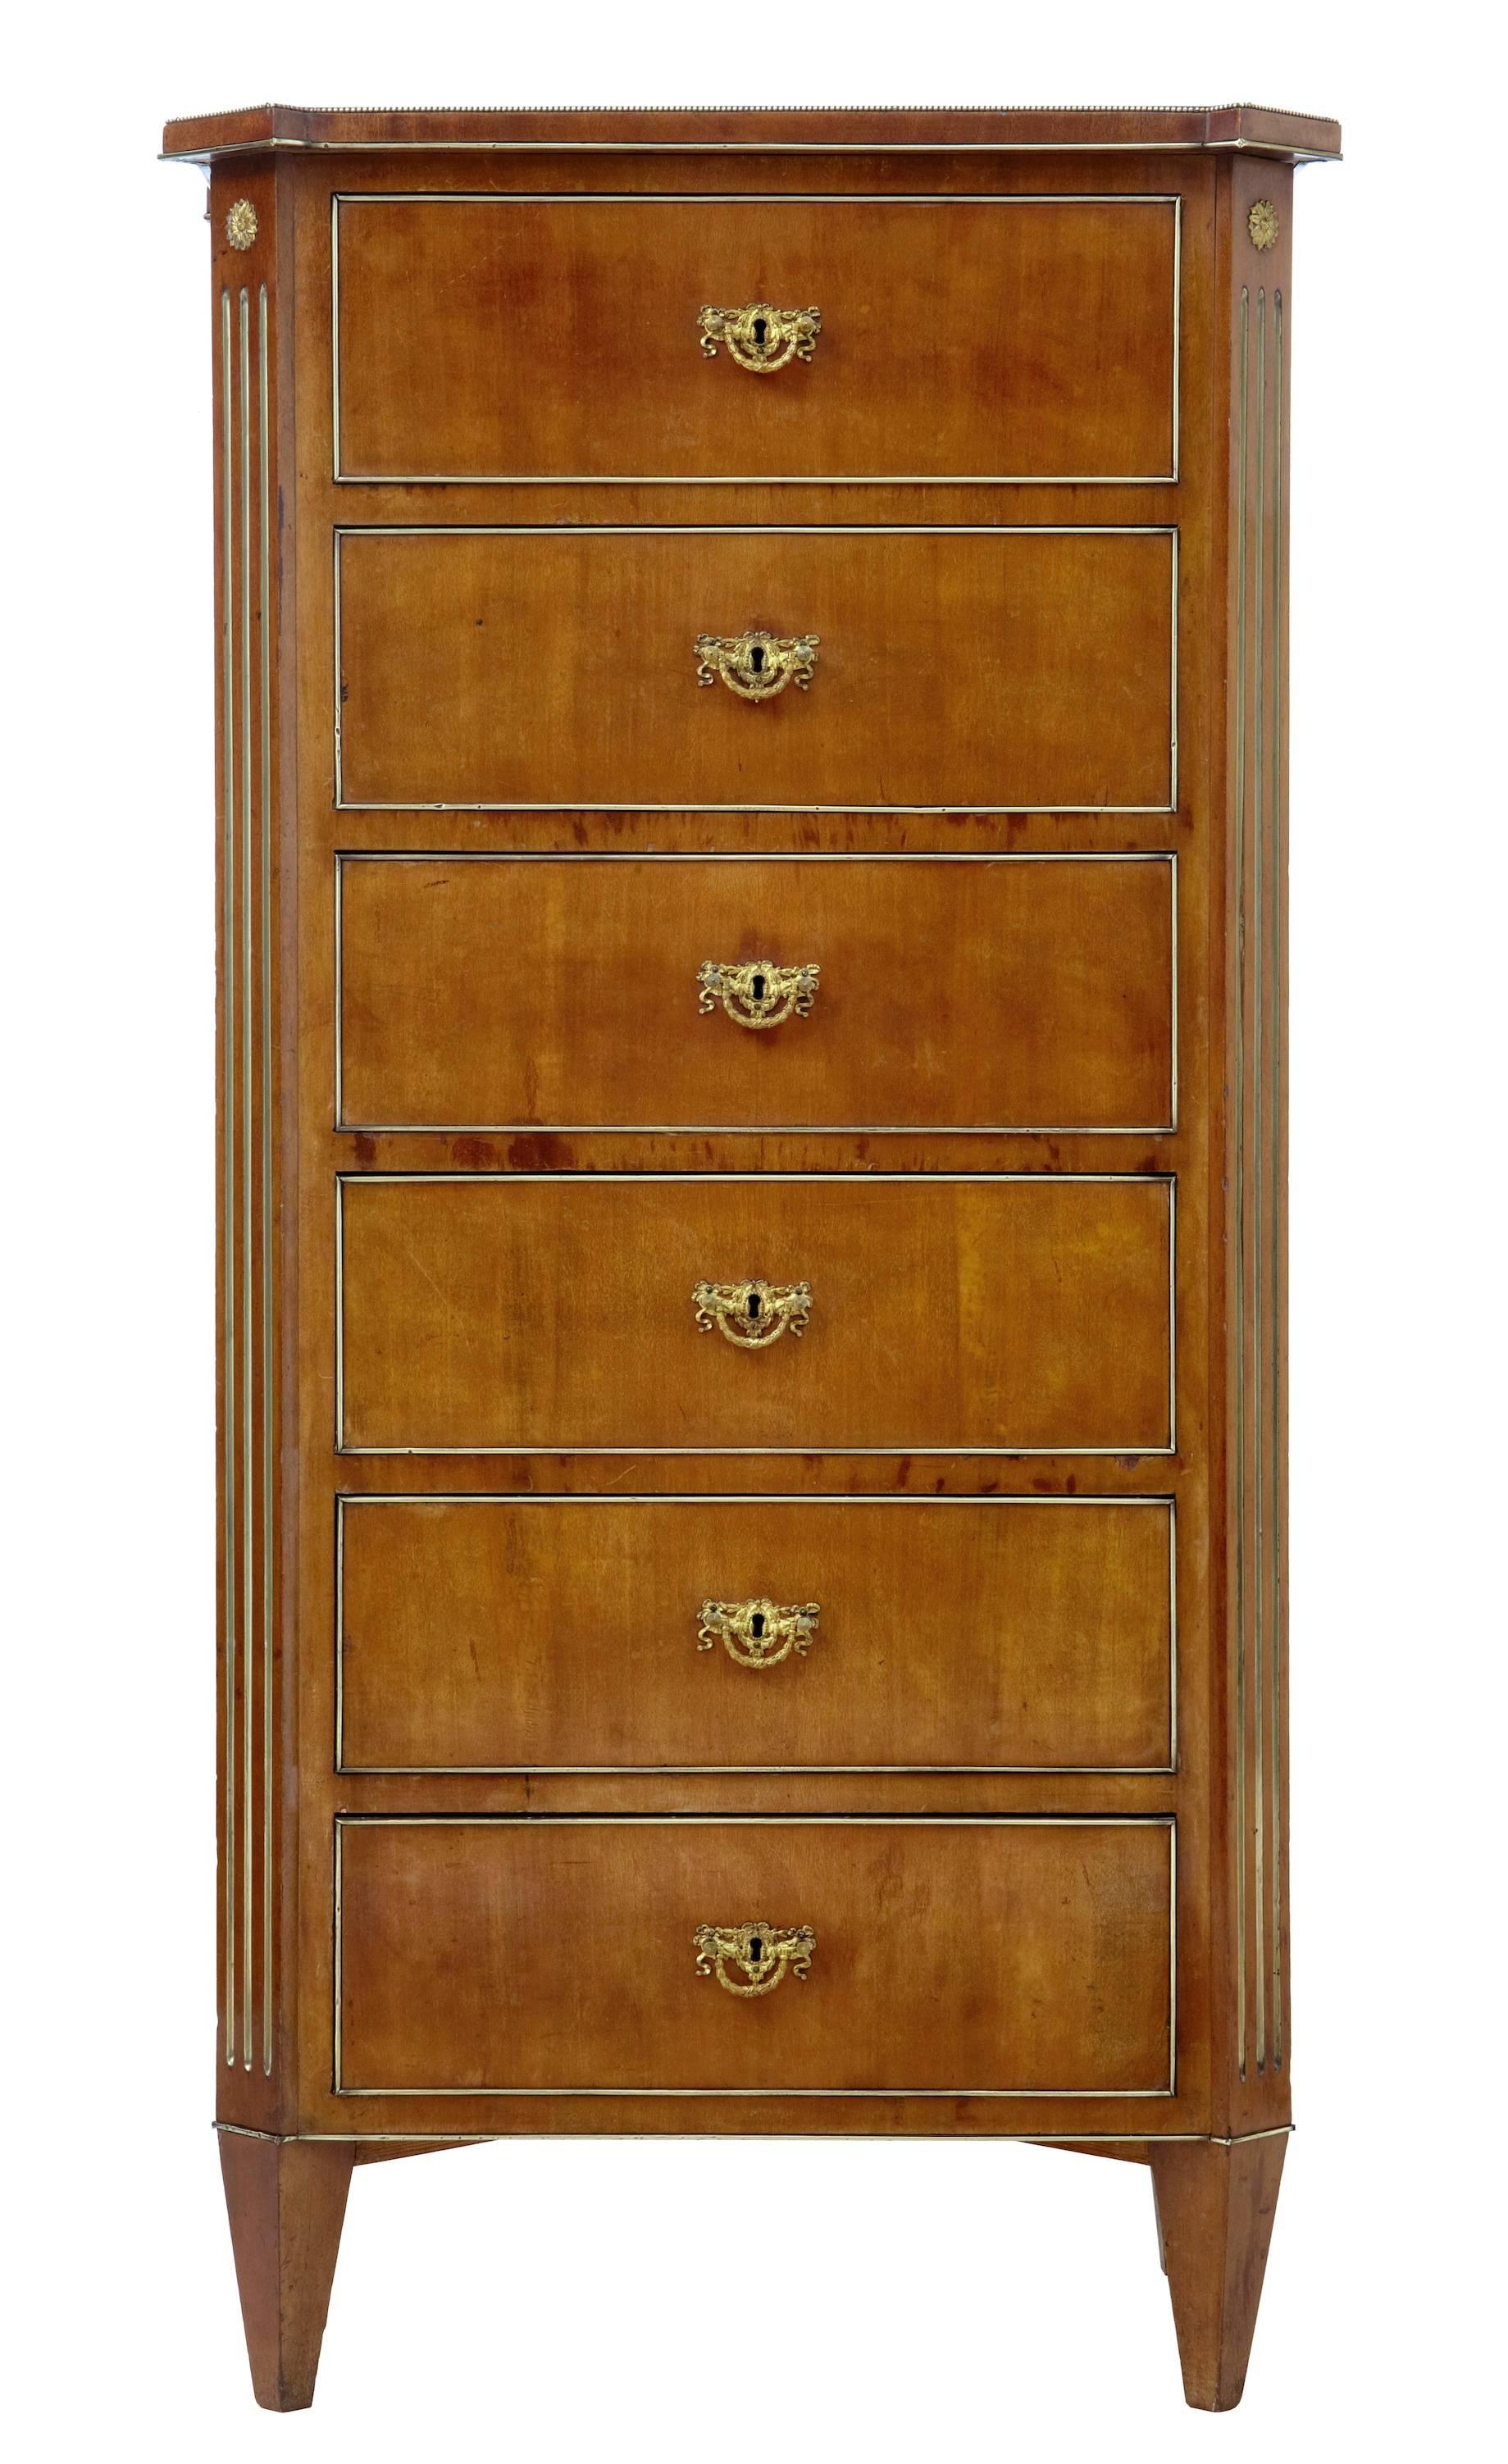 Good quality tallboy chest in the French taste, circa 1880.
Canted and fluted sides.
Six-drawer chest with brass edging to drawer fronts.

Some natural fading to sides, minor veneer restorations.
Marks and evidence of use to top.

Height: 54